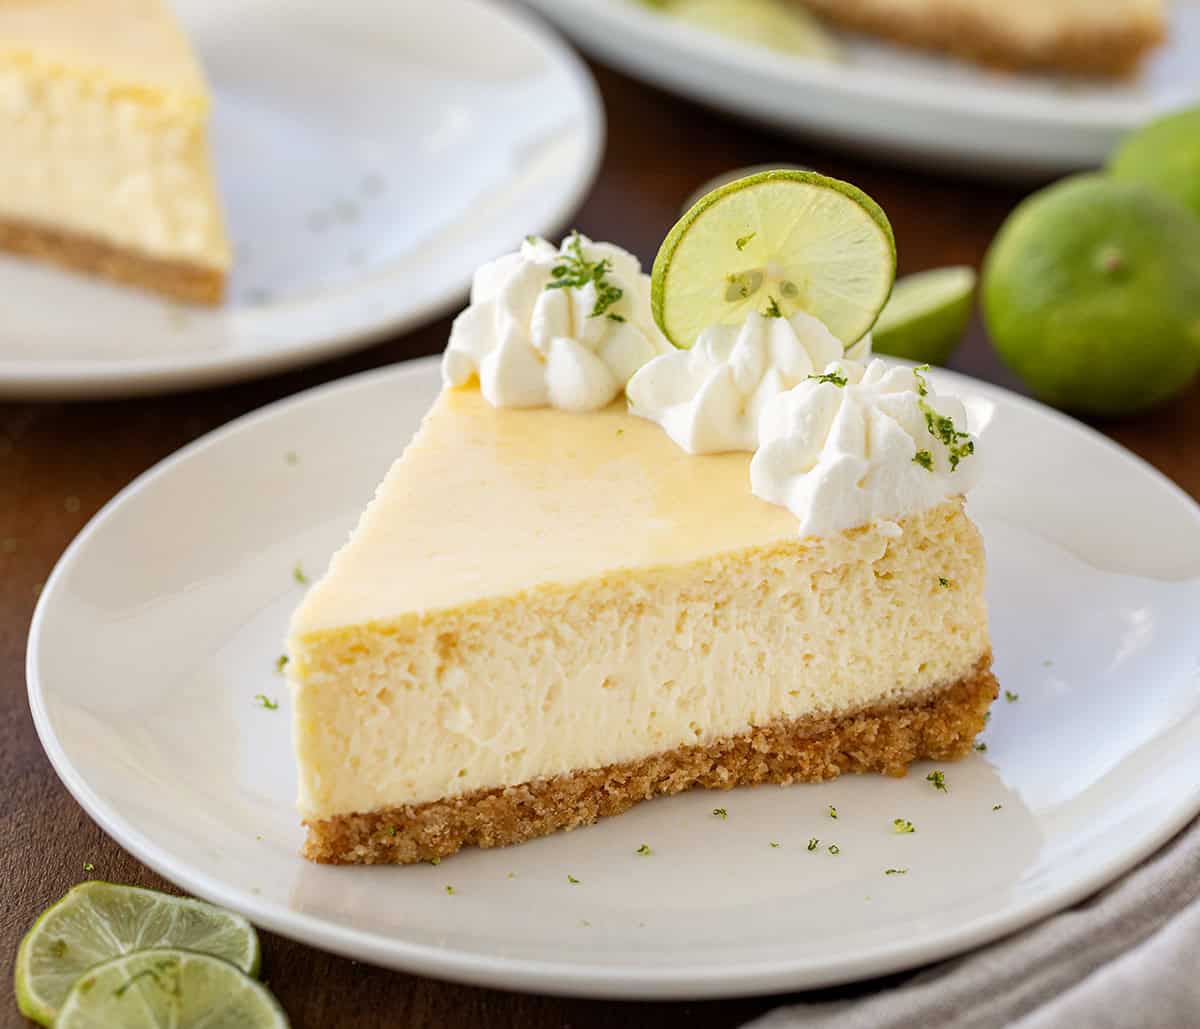 A piece of Key Lime Cheesecake on a white plate on a wooden table.